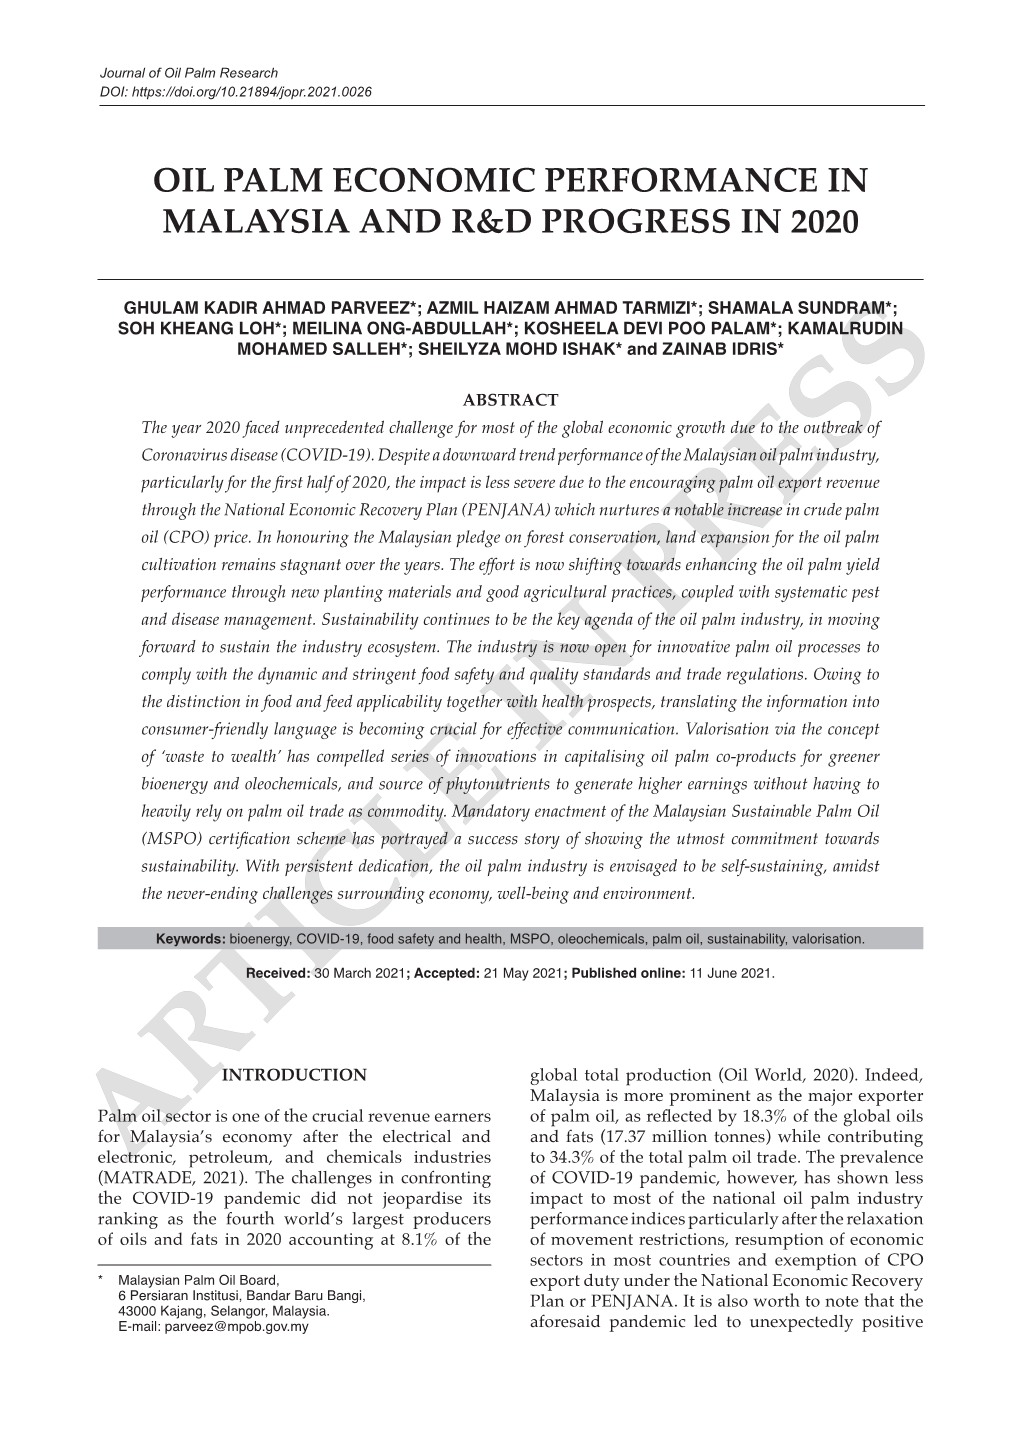 Oil Palm Economic Performance in Malaysia and R&D Progress in 2020